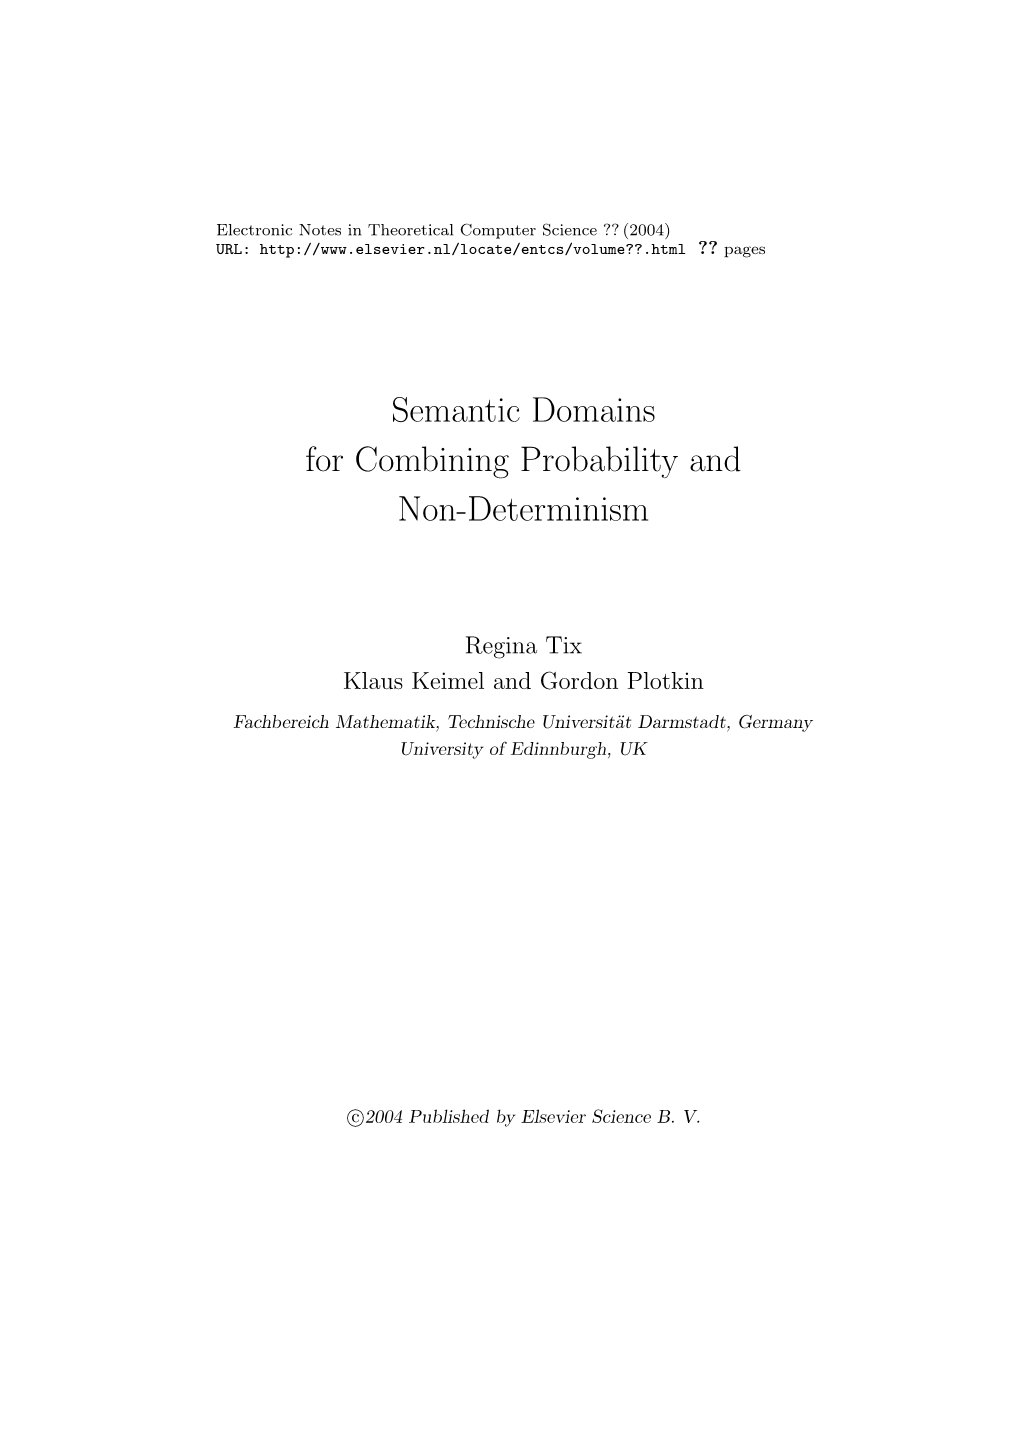 Semantic Domains for Combining Probability and Non-Determinism